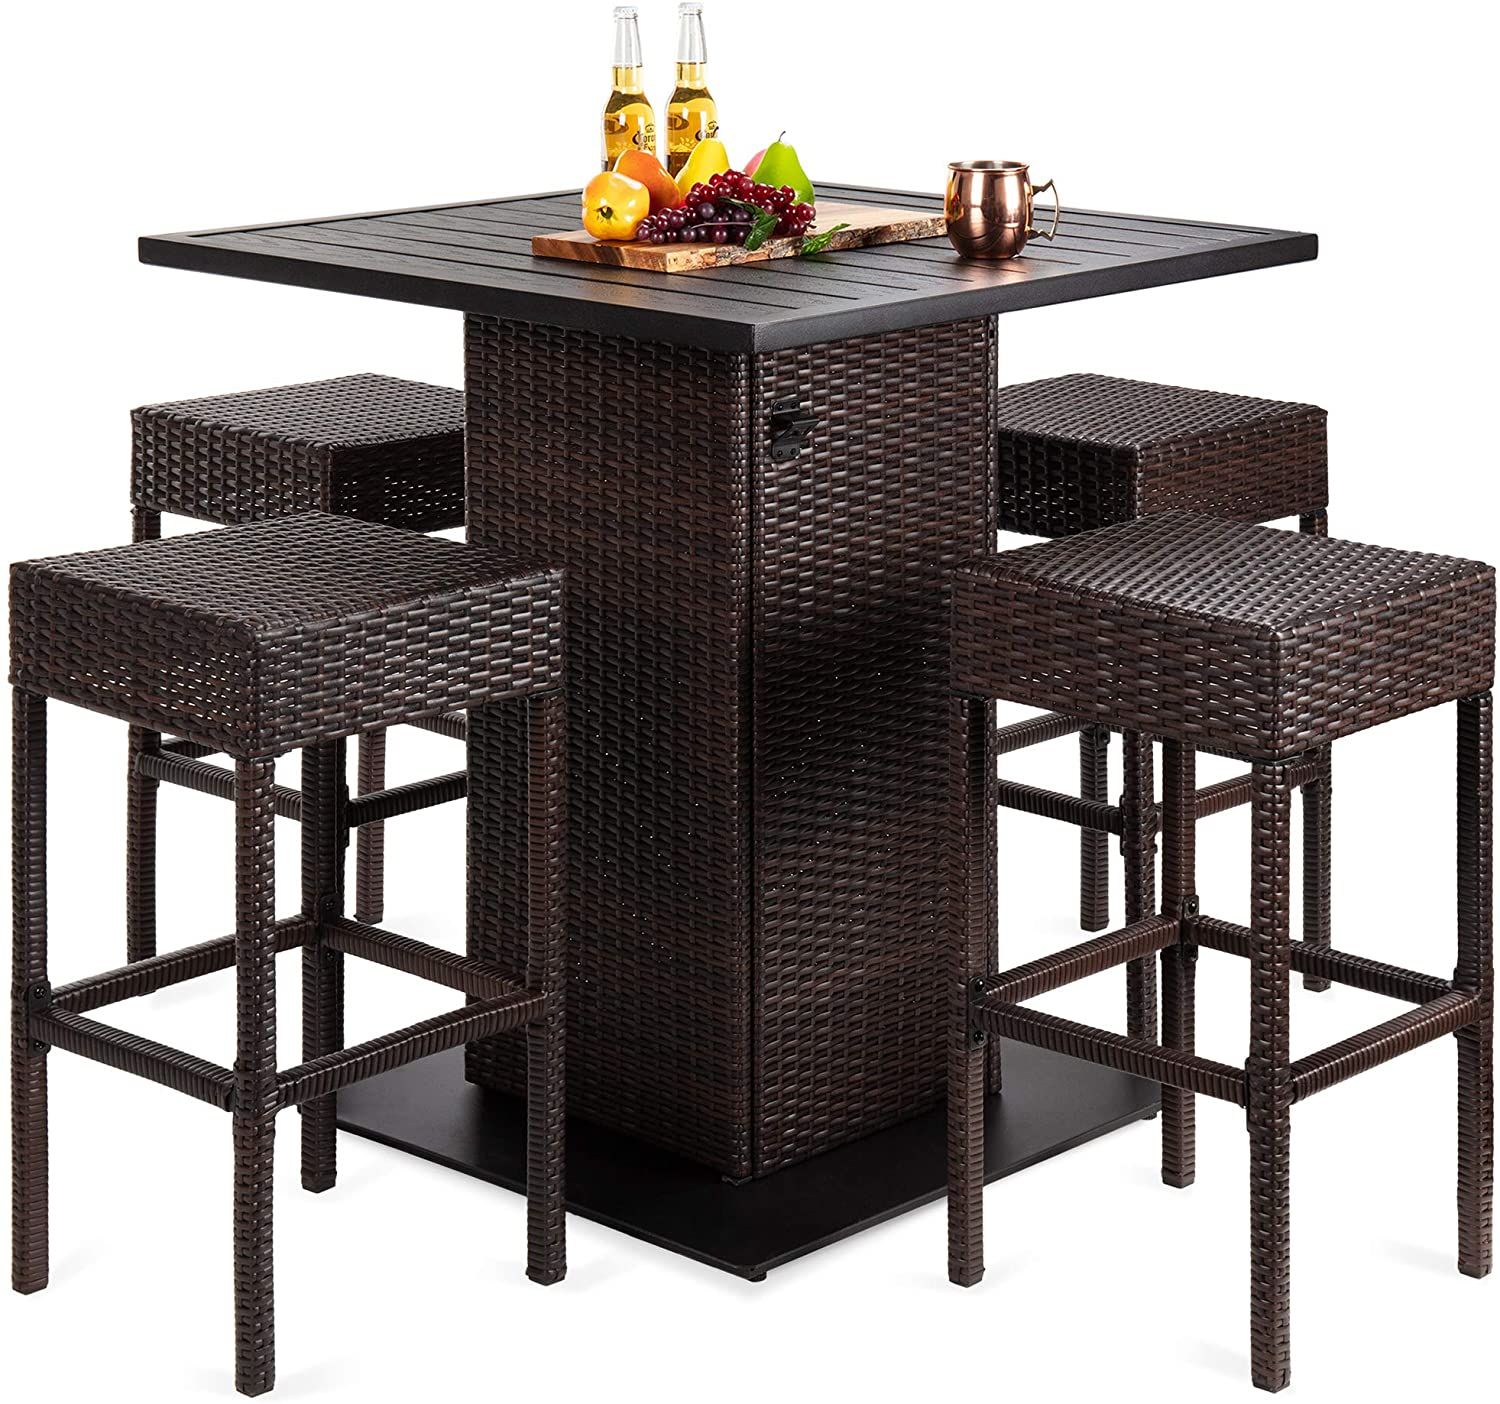 Outdoor Wicker Bar Table Set - $$title$$